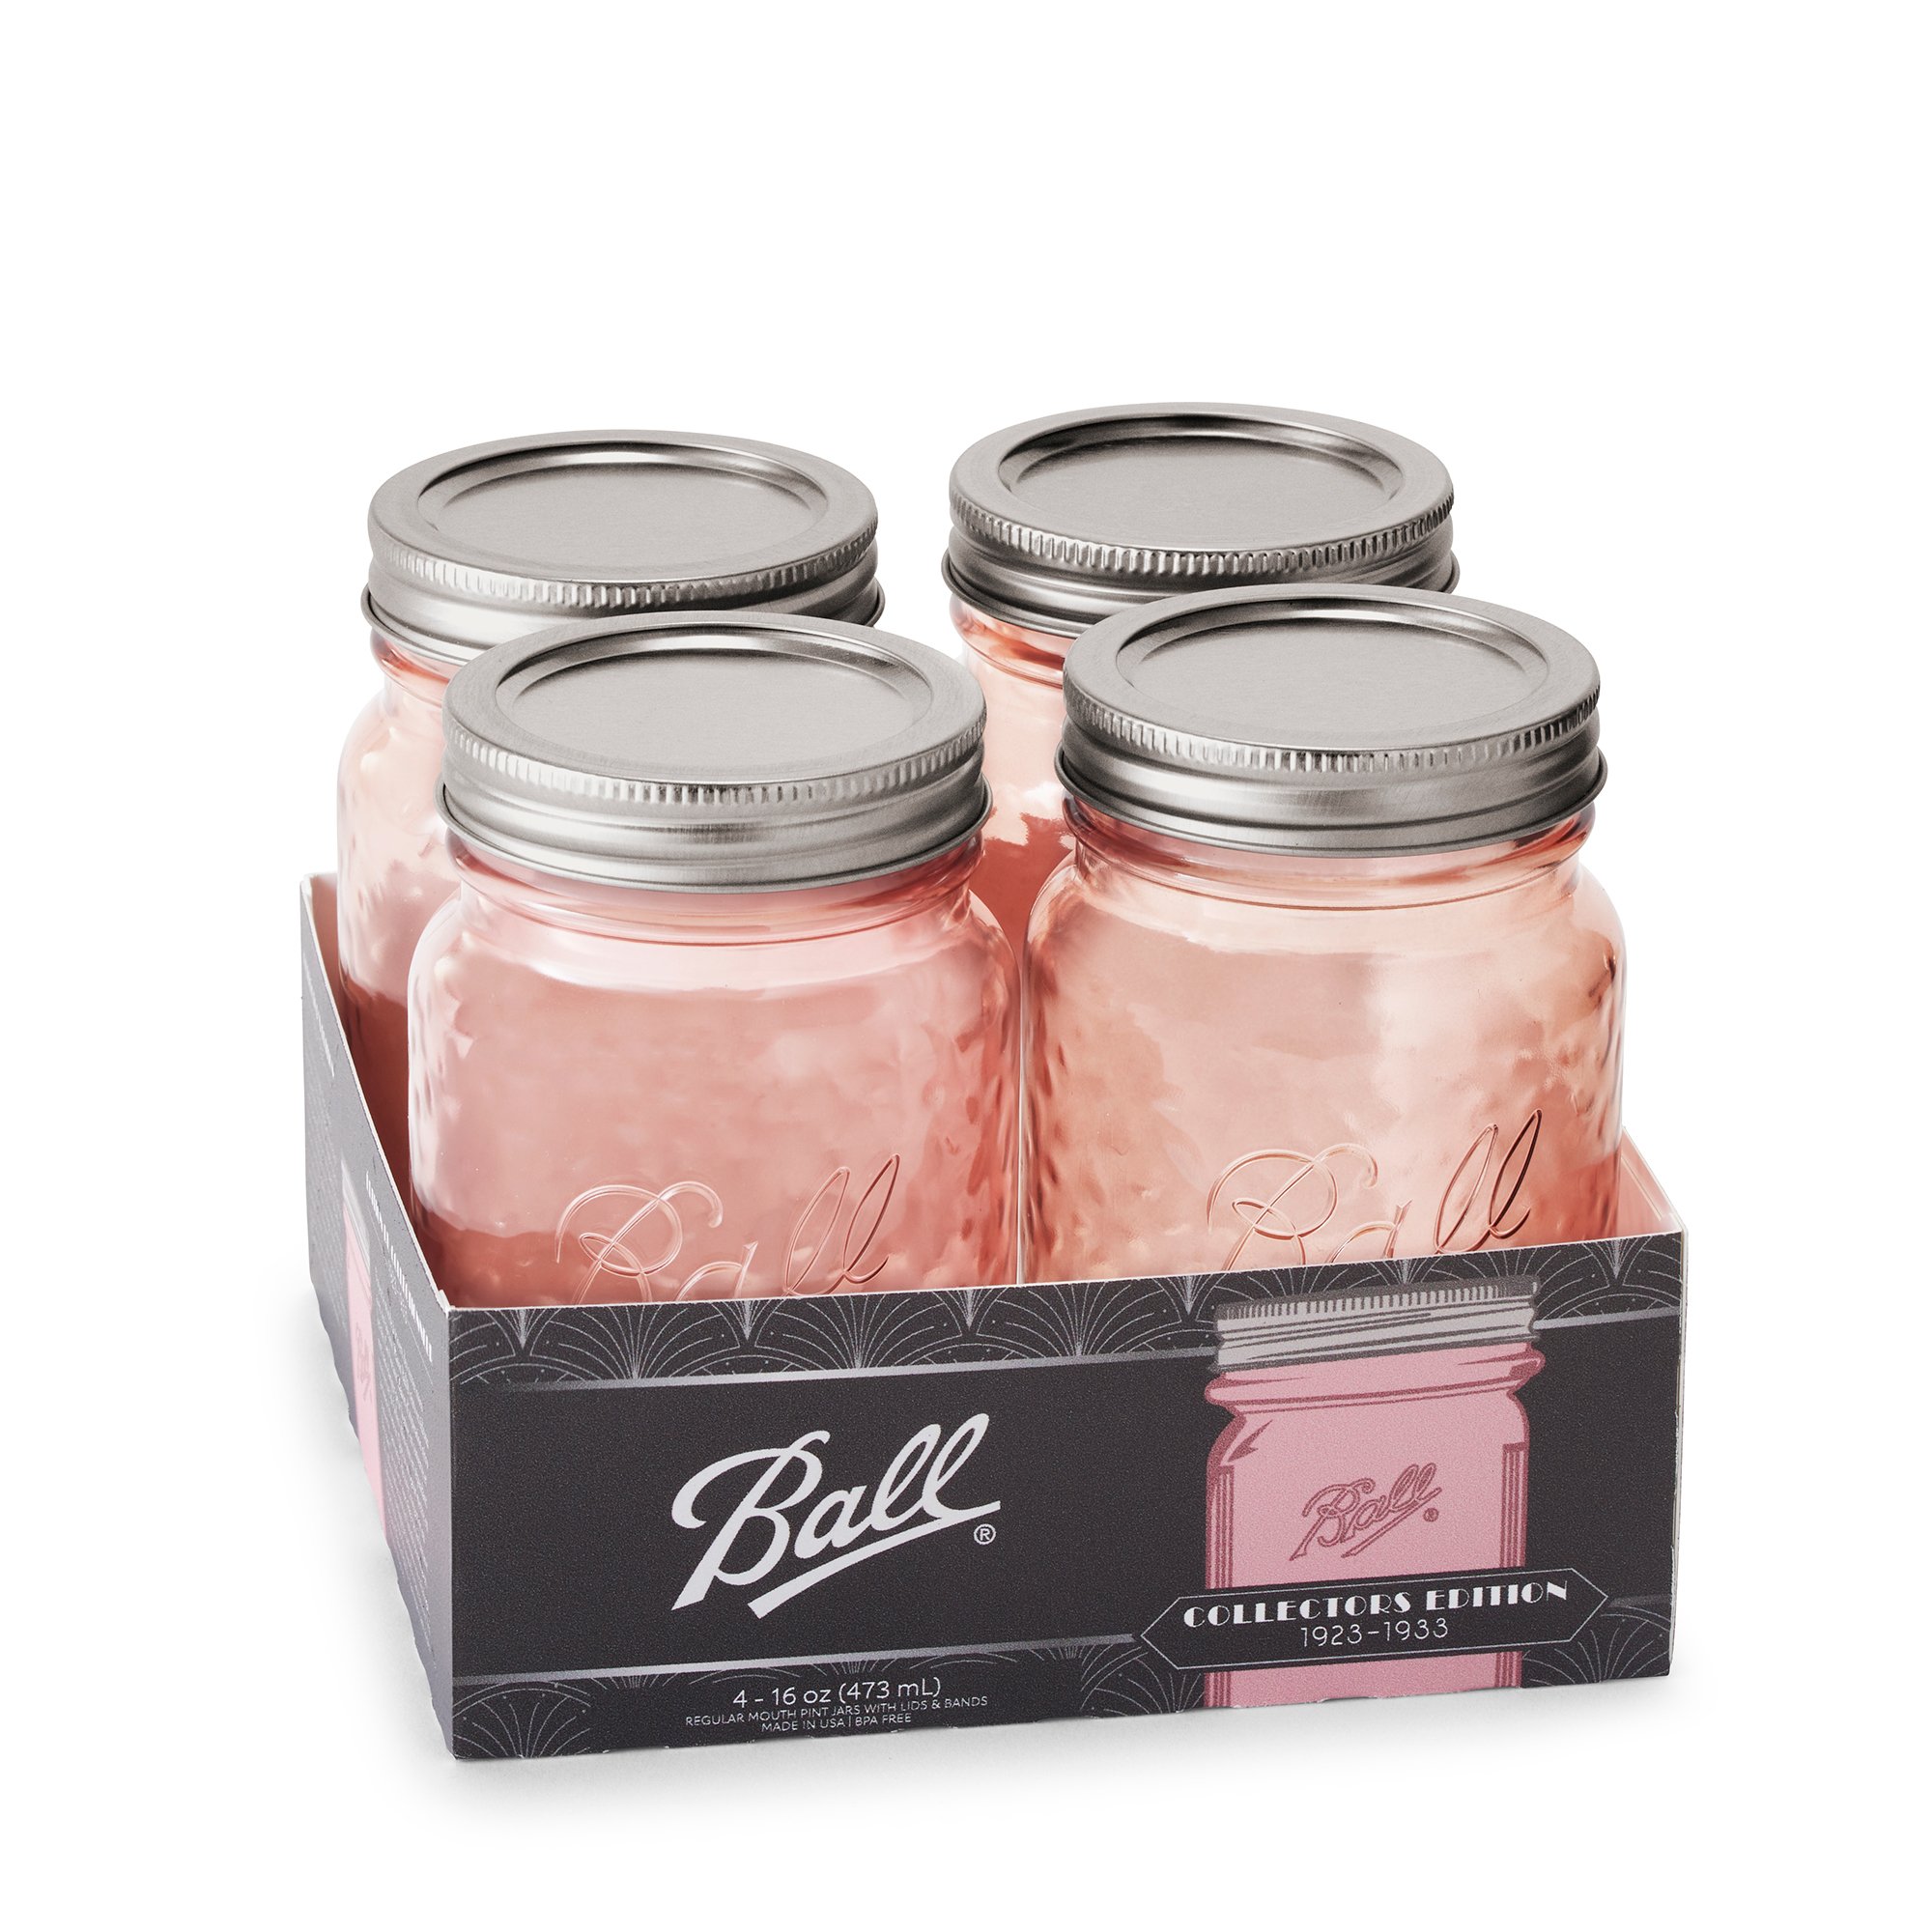 https://s7d9.scene7.com/is/image//NewellRubbermaid/2166213-ball-jar-vintage-rose-RM-pint-4pk-in-pack-angle-square